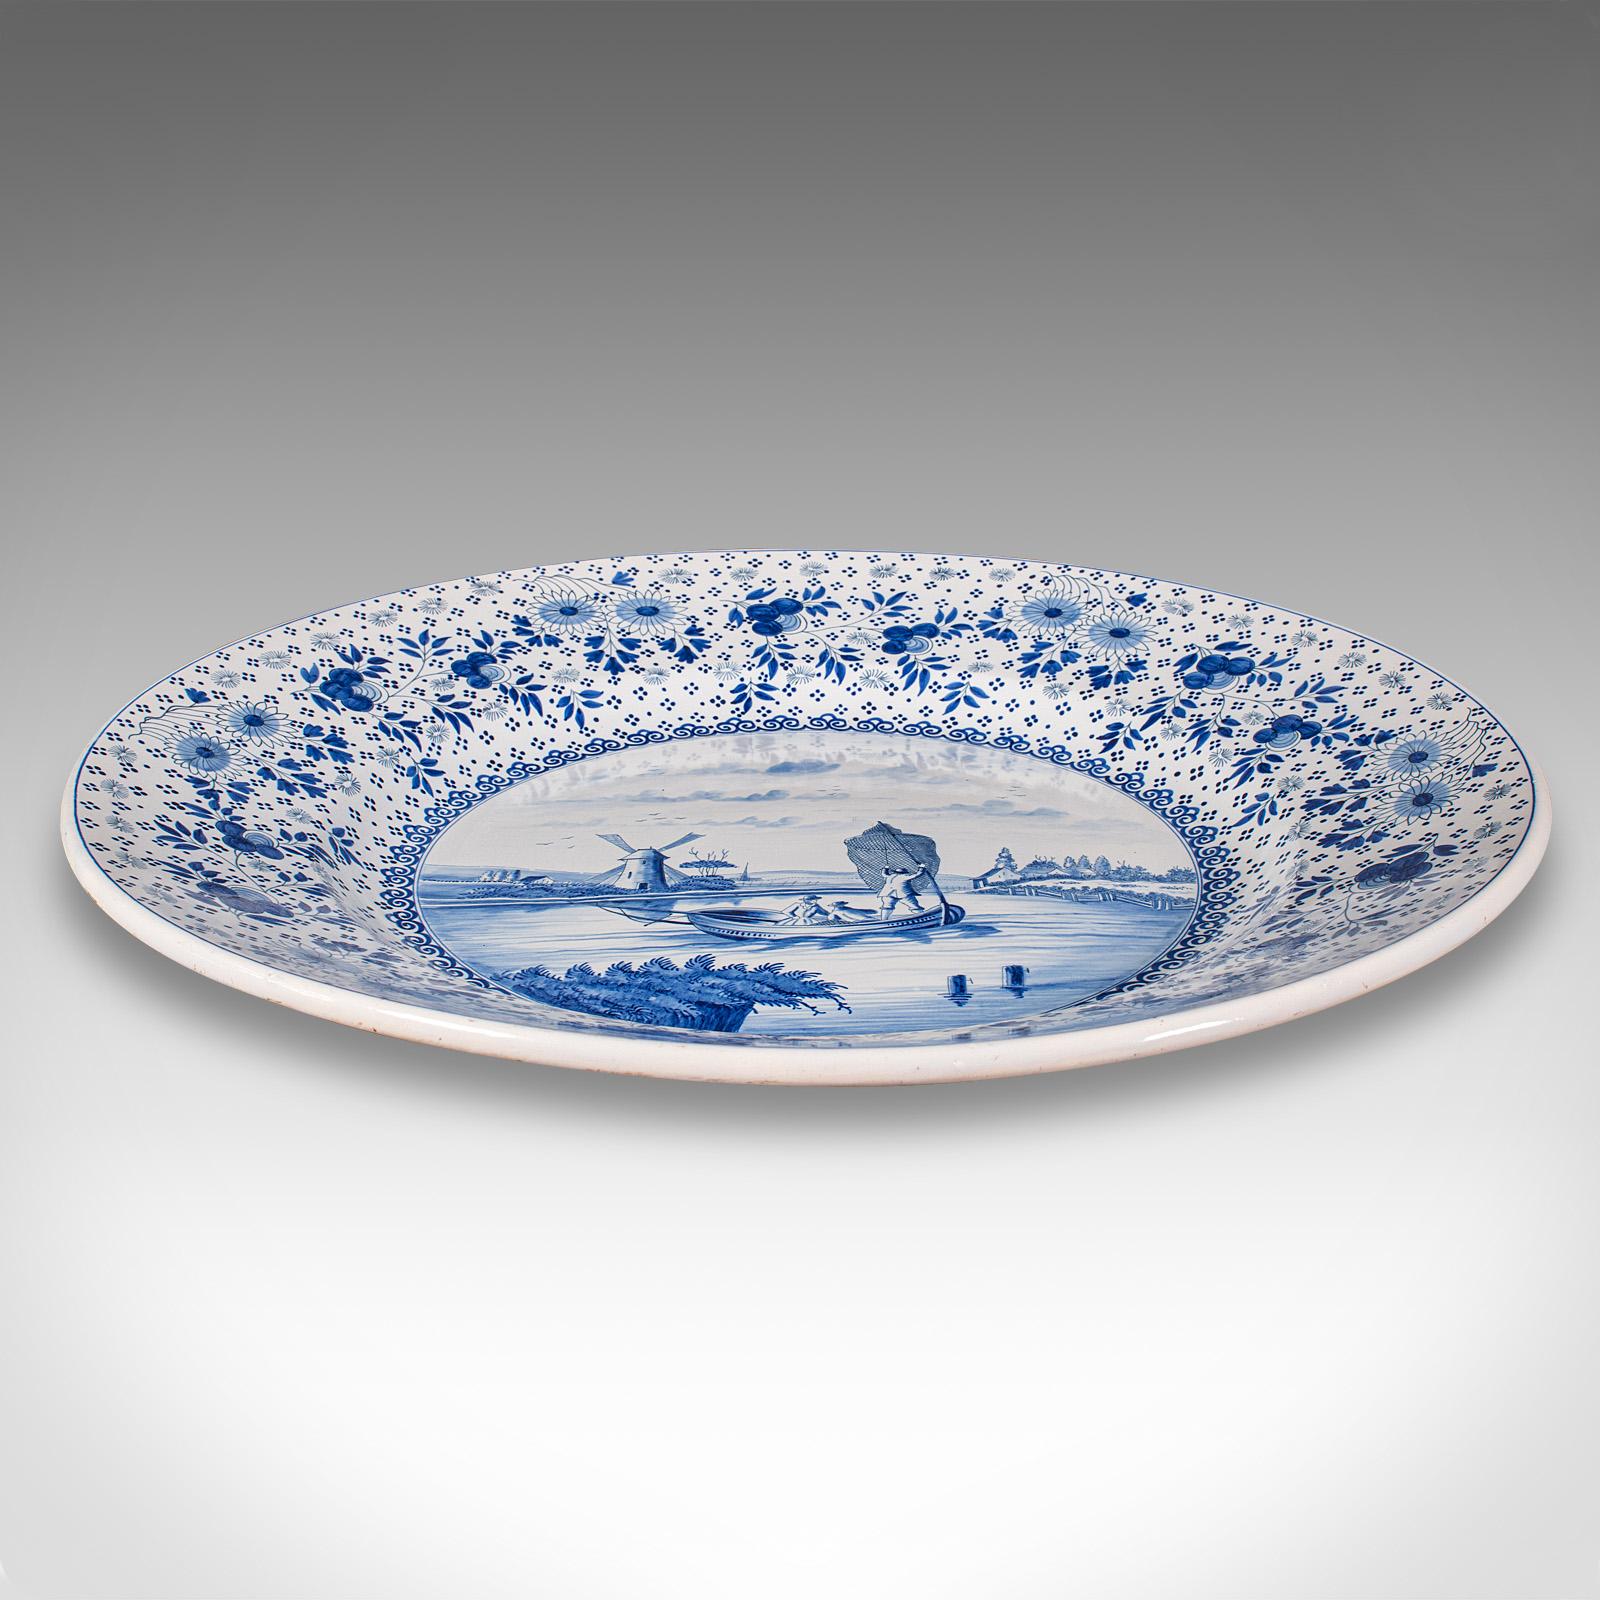 This is a very large antique decorative serving plate. A Belgian, ceramic charger with blue and white finish, dating to the early 20th century, circa 1920.

Of Impressive size, with a delightful blue & white appearance
Displays a desirable aged